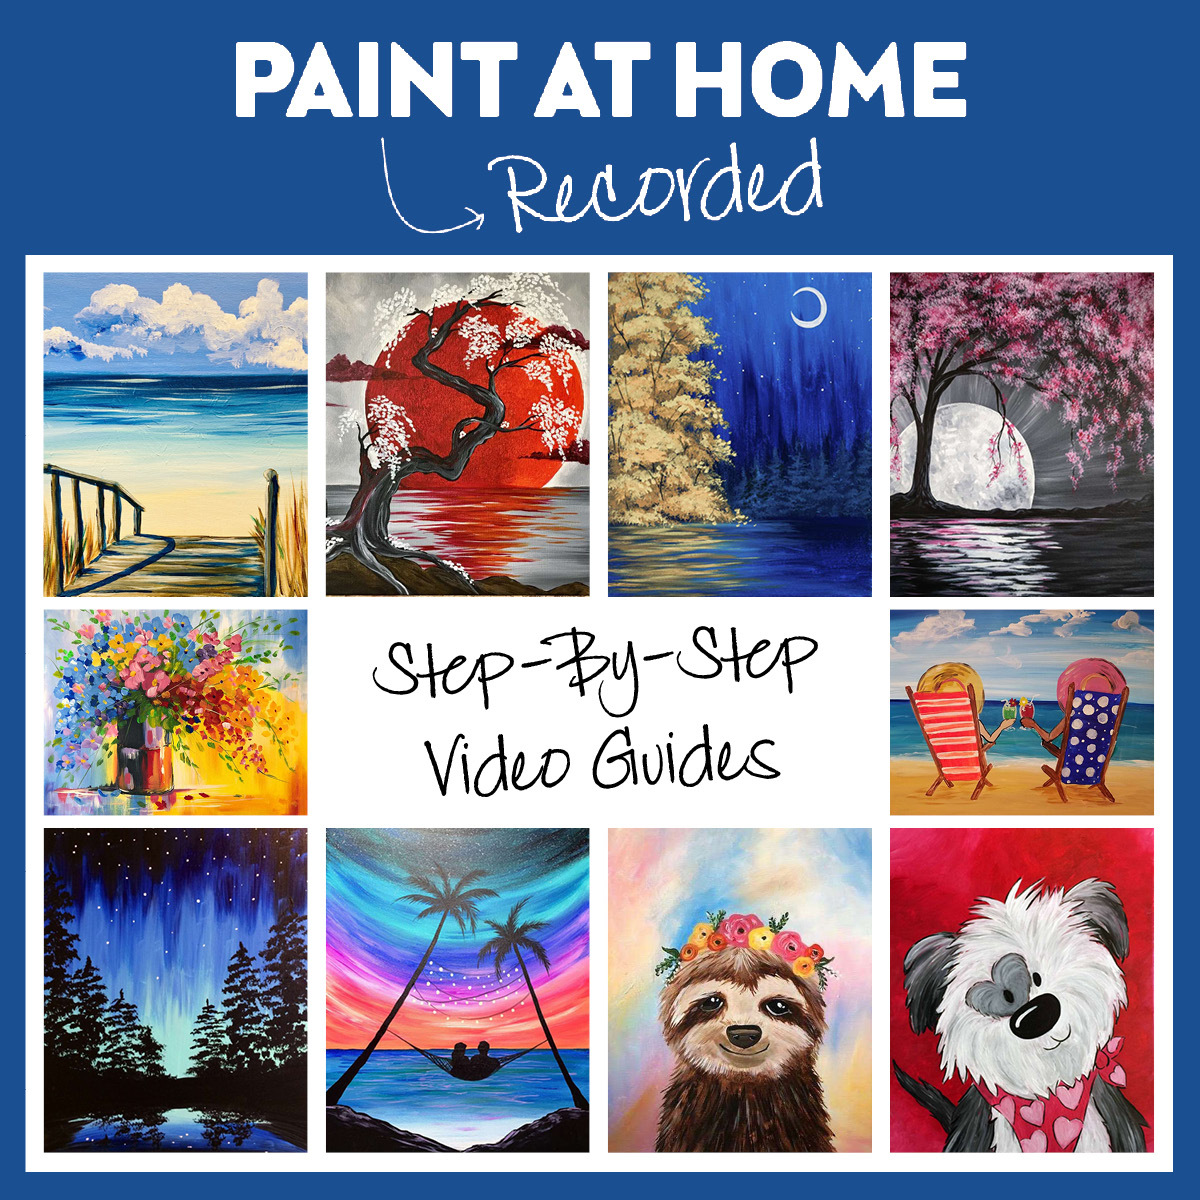 PAINT AT HOME WITH VIDEO TUTORIAL